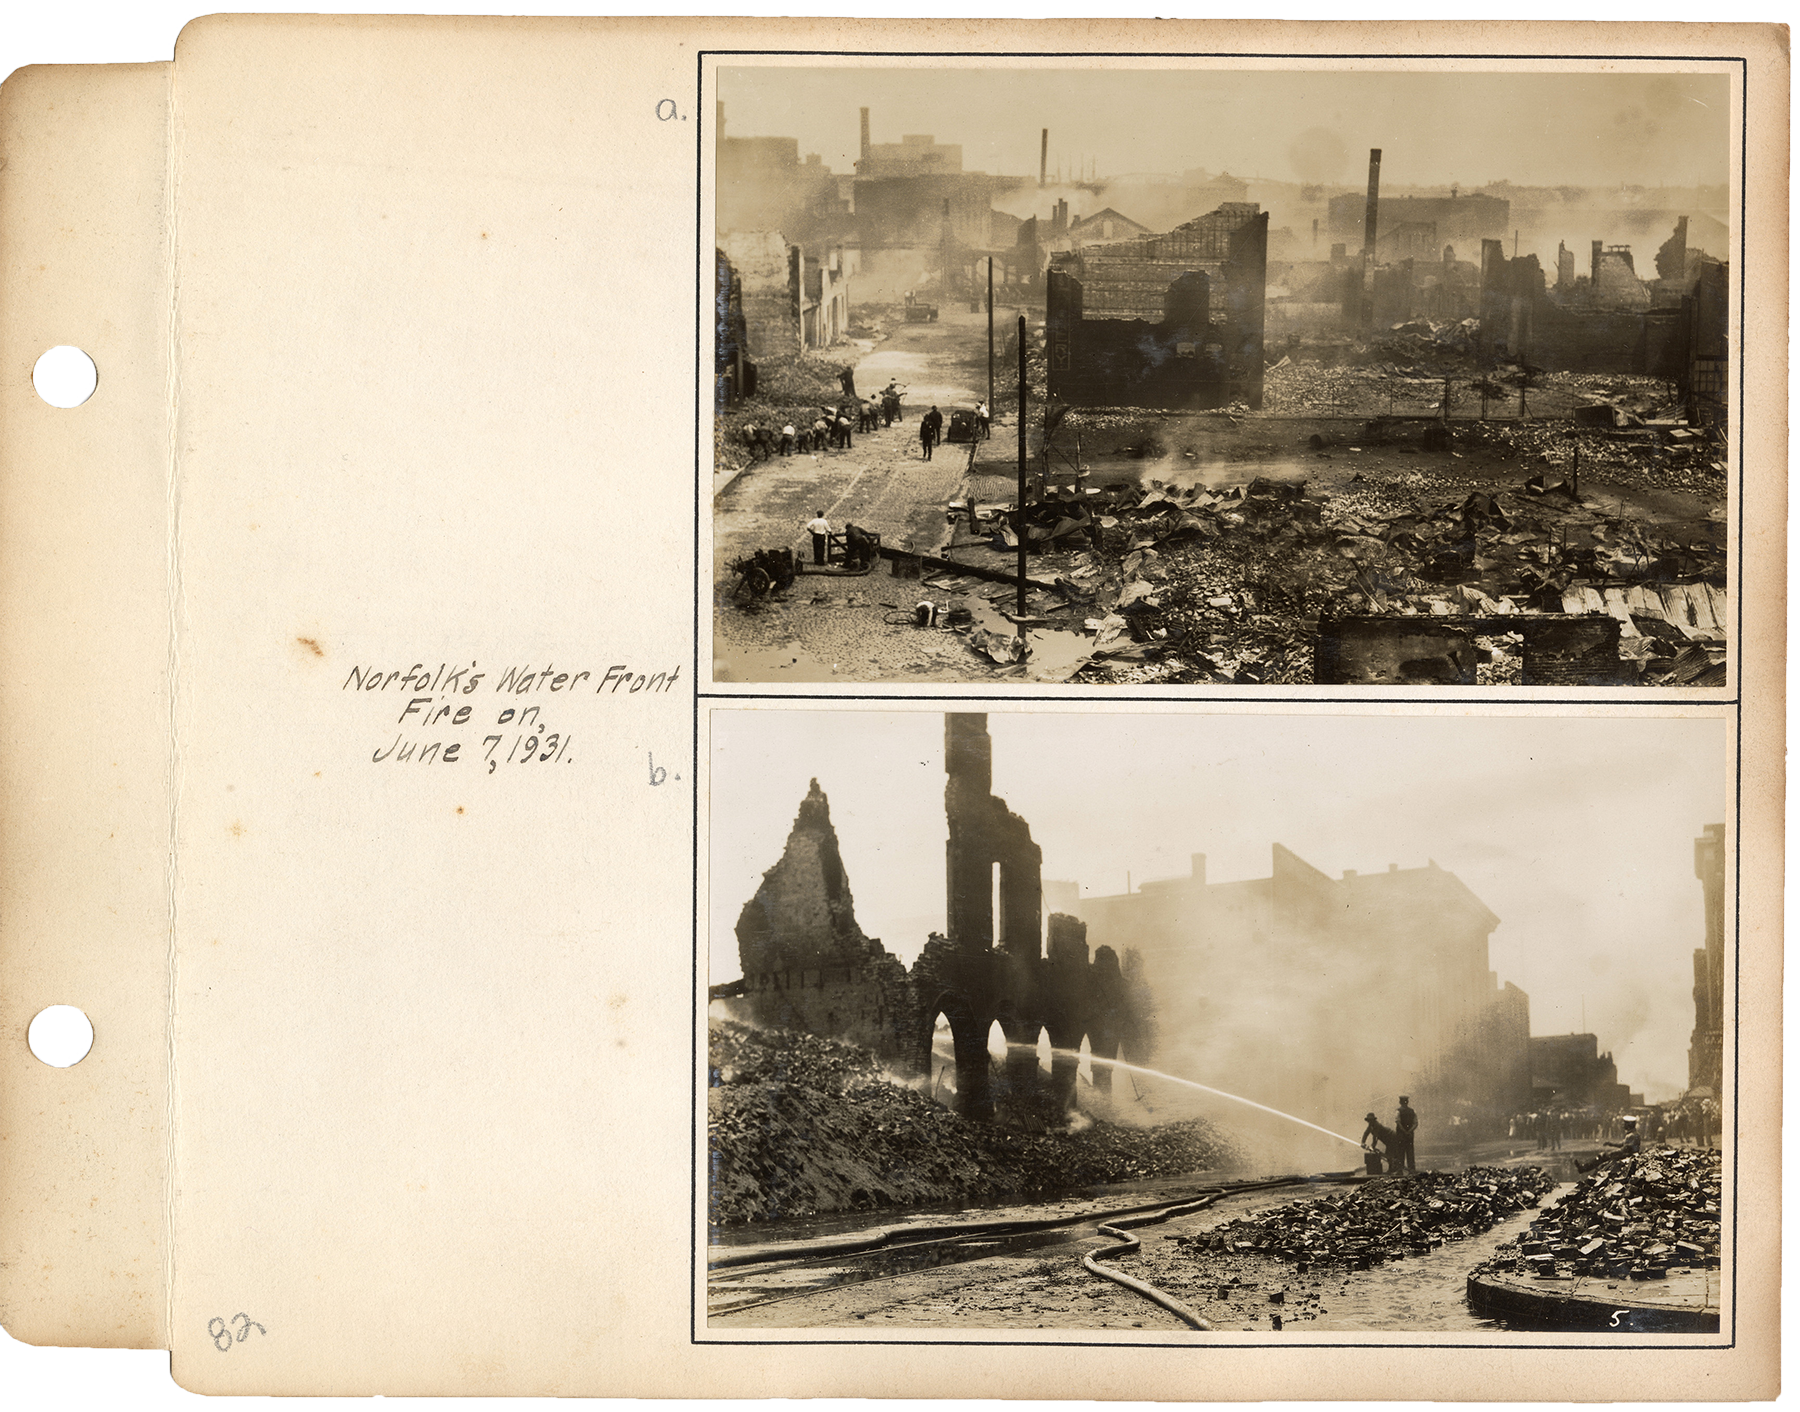 Album page with two photos showing fire-damaged buildings